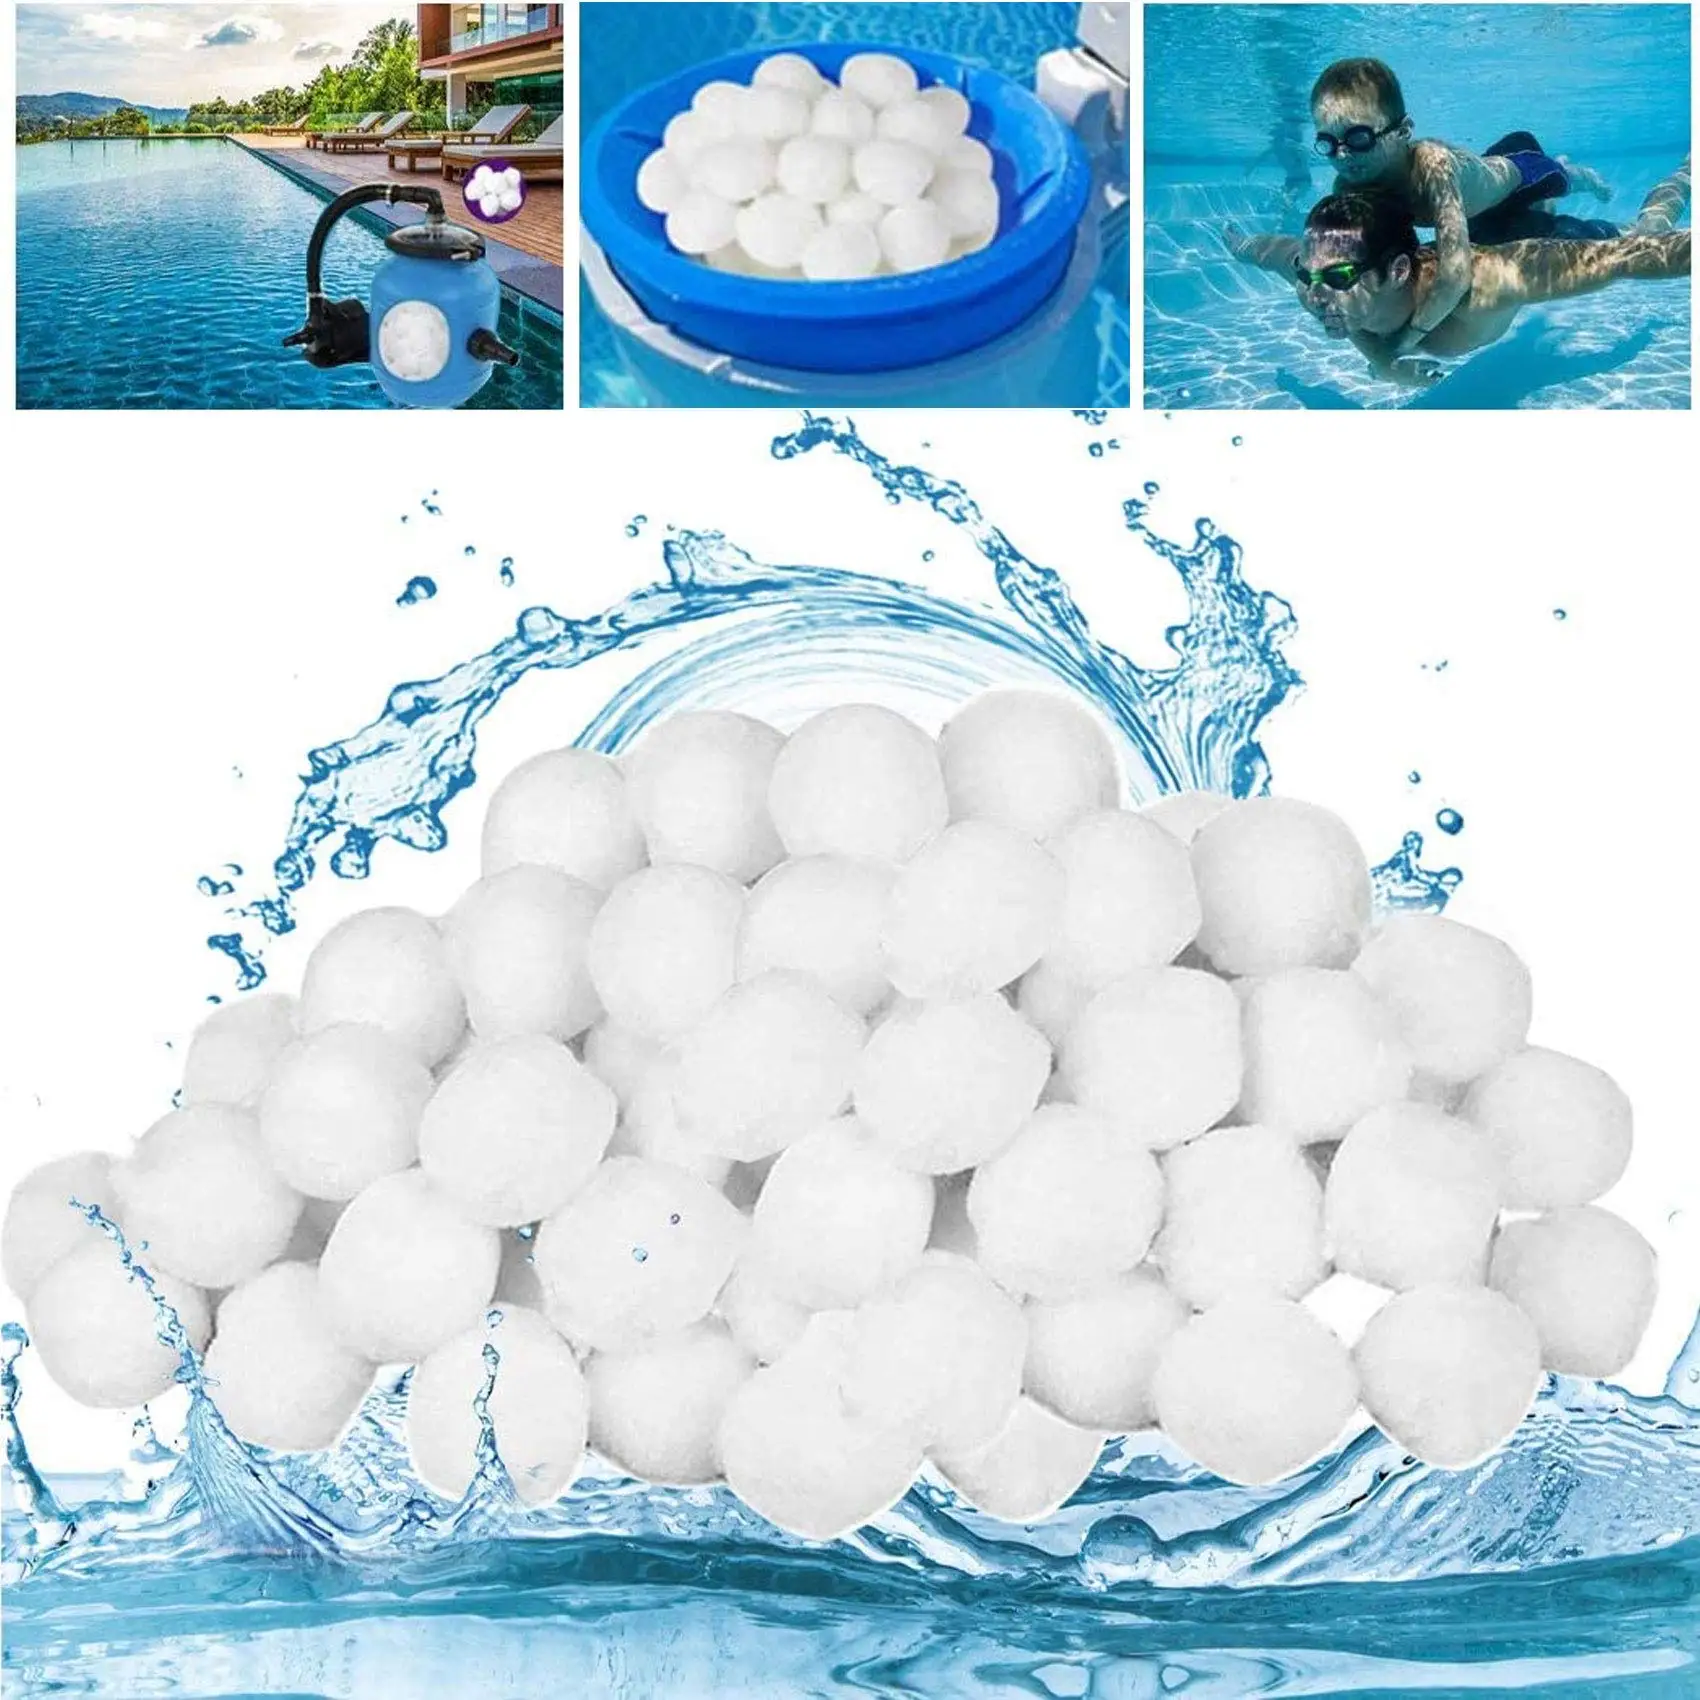 Pool Filter Balls, Filter Balls For Sand Filter Eco-Friendly Fiber Ball for Pond, Swimming Pool Sand Filters Media Water Filteri da29 00020b refrigerator water filter replacement for samsung da29 00020b da29 00020a haf cin exp 46 9101 wd f27 2 filters